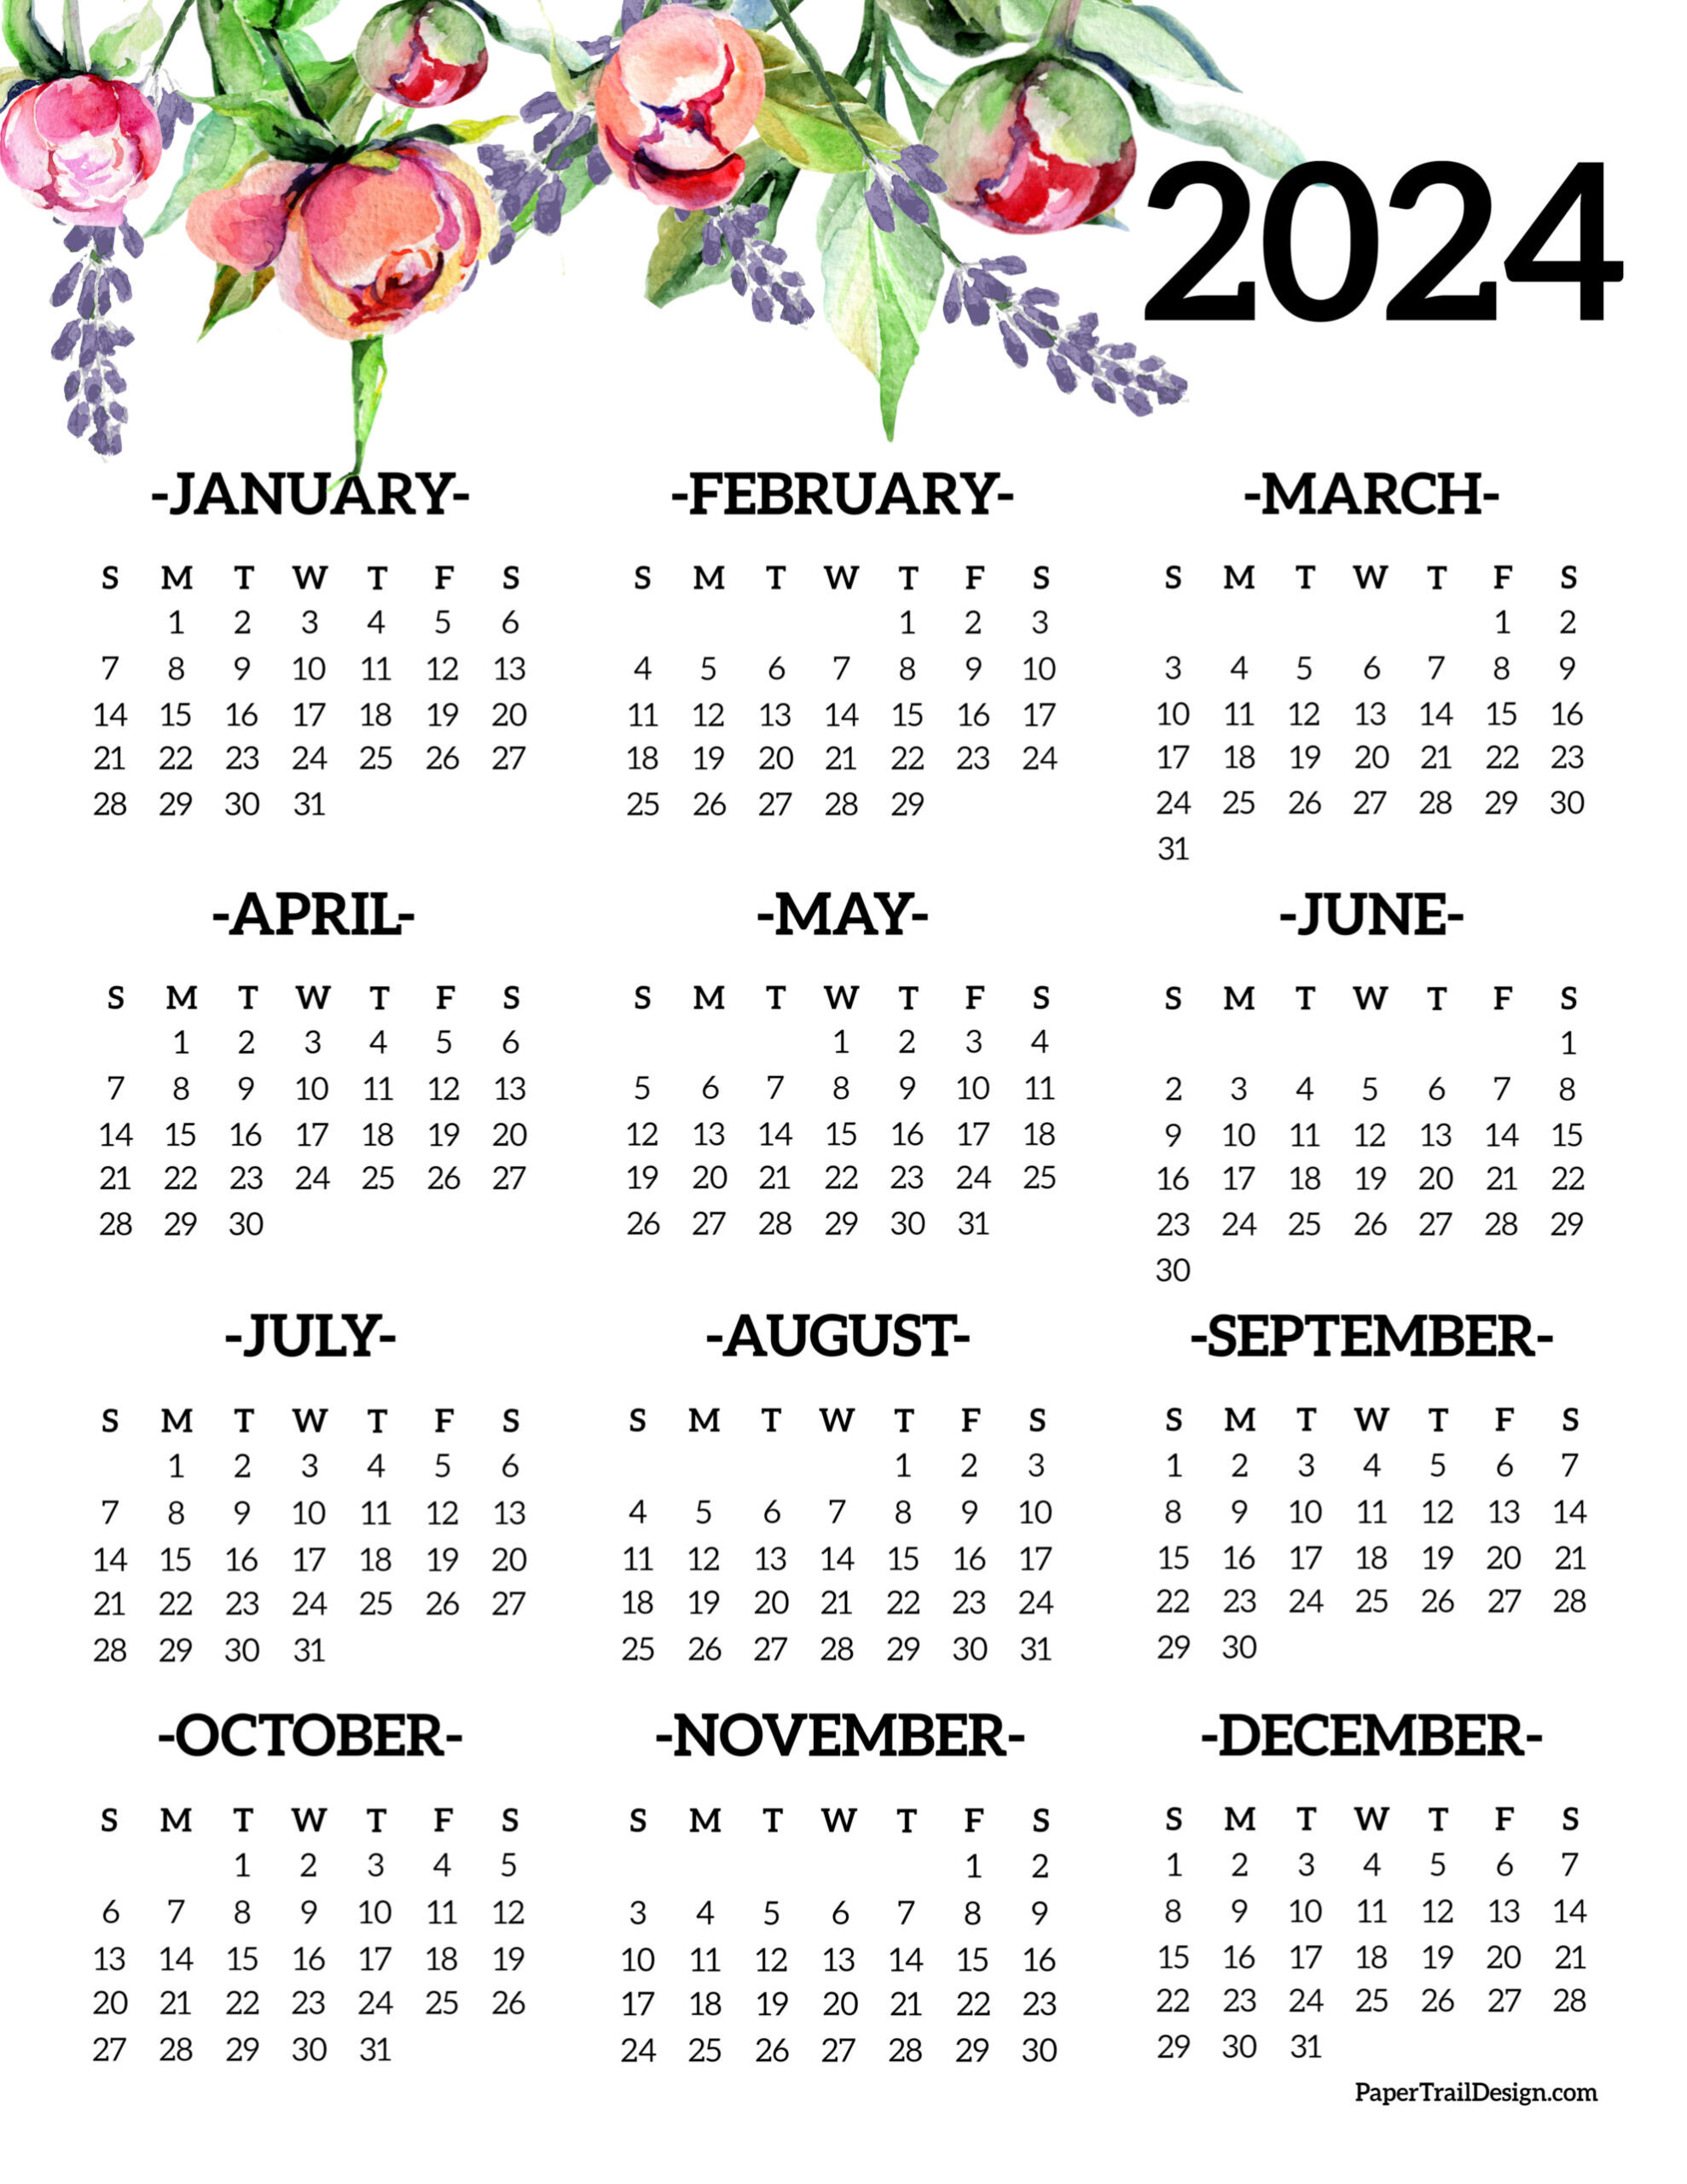 Calendar 2024 Printable One Page - Paper Trail Design for 1 Page 2024 Calendar Printable